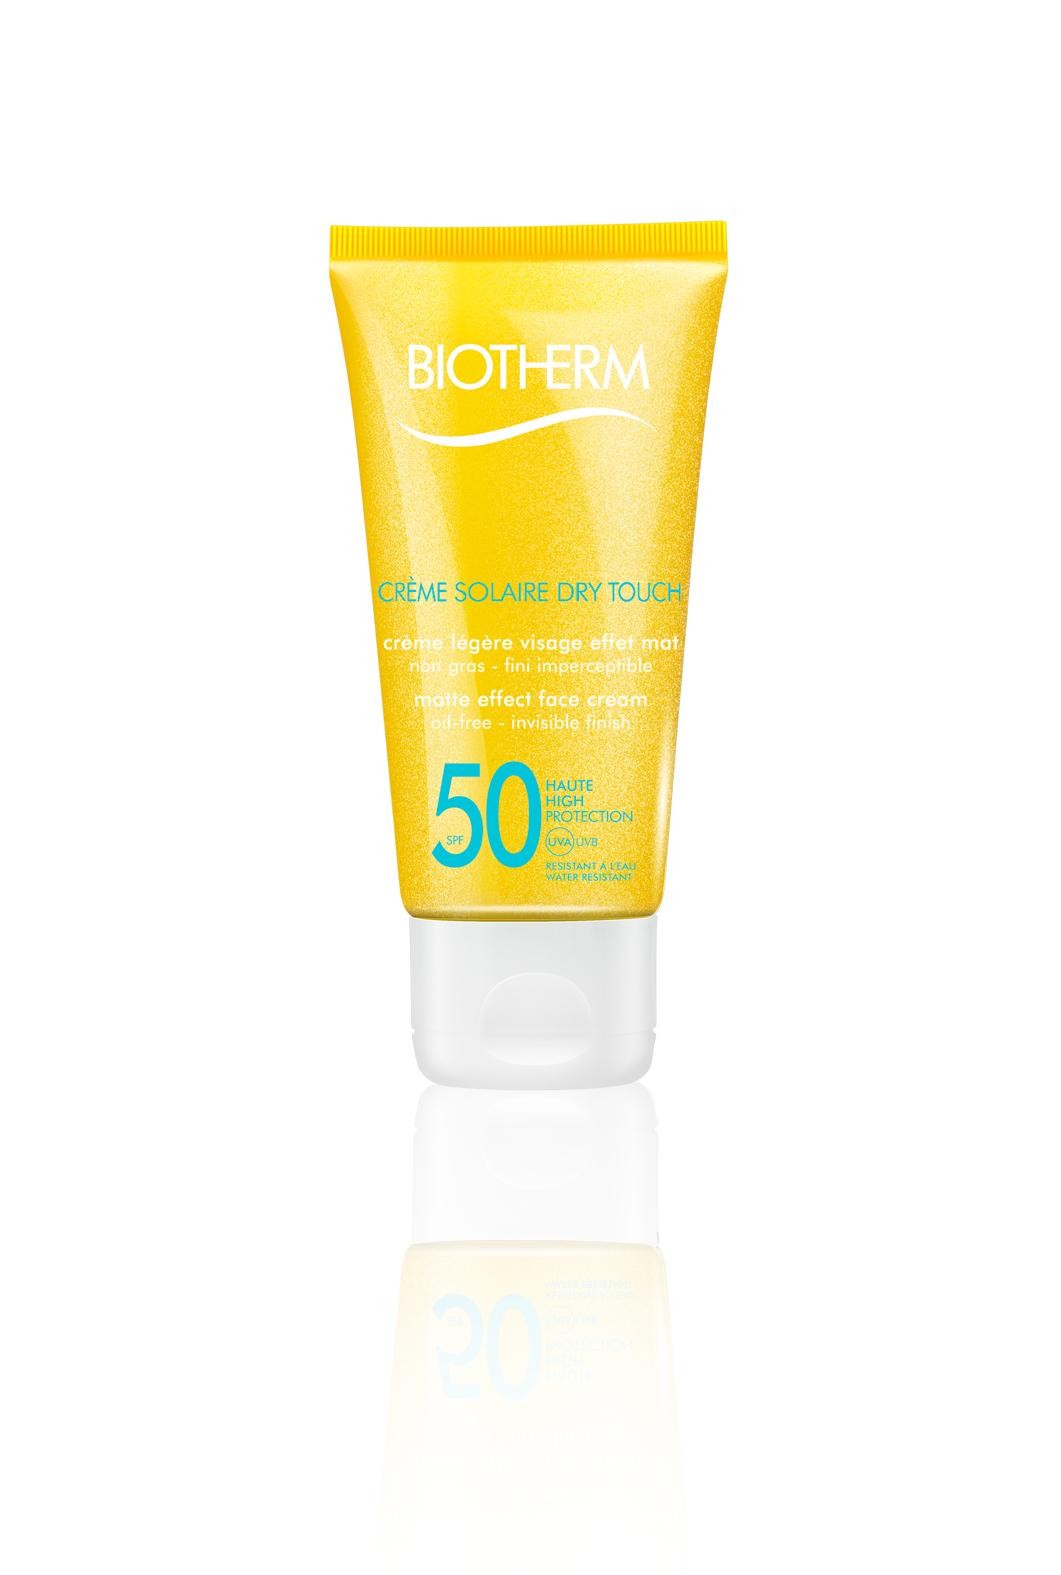 Biotherm Creme Solaire Dry Touch SPF 50, 50ml